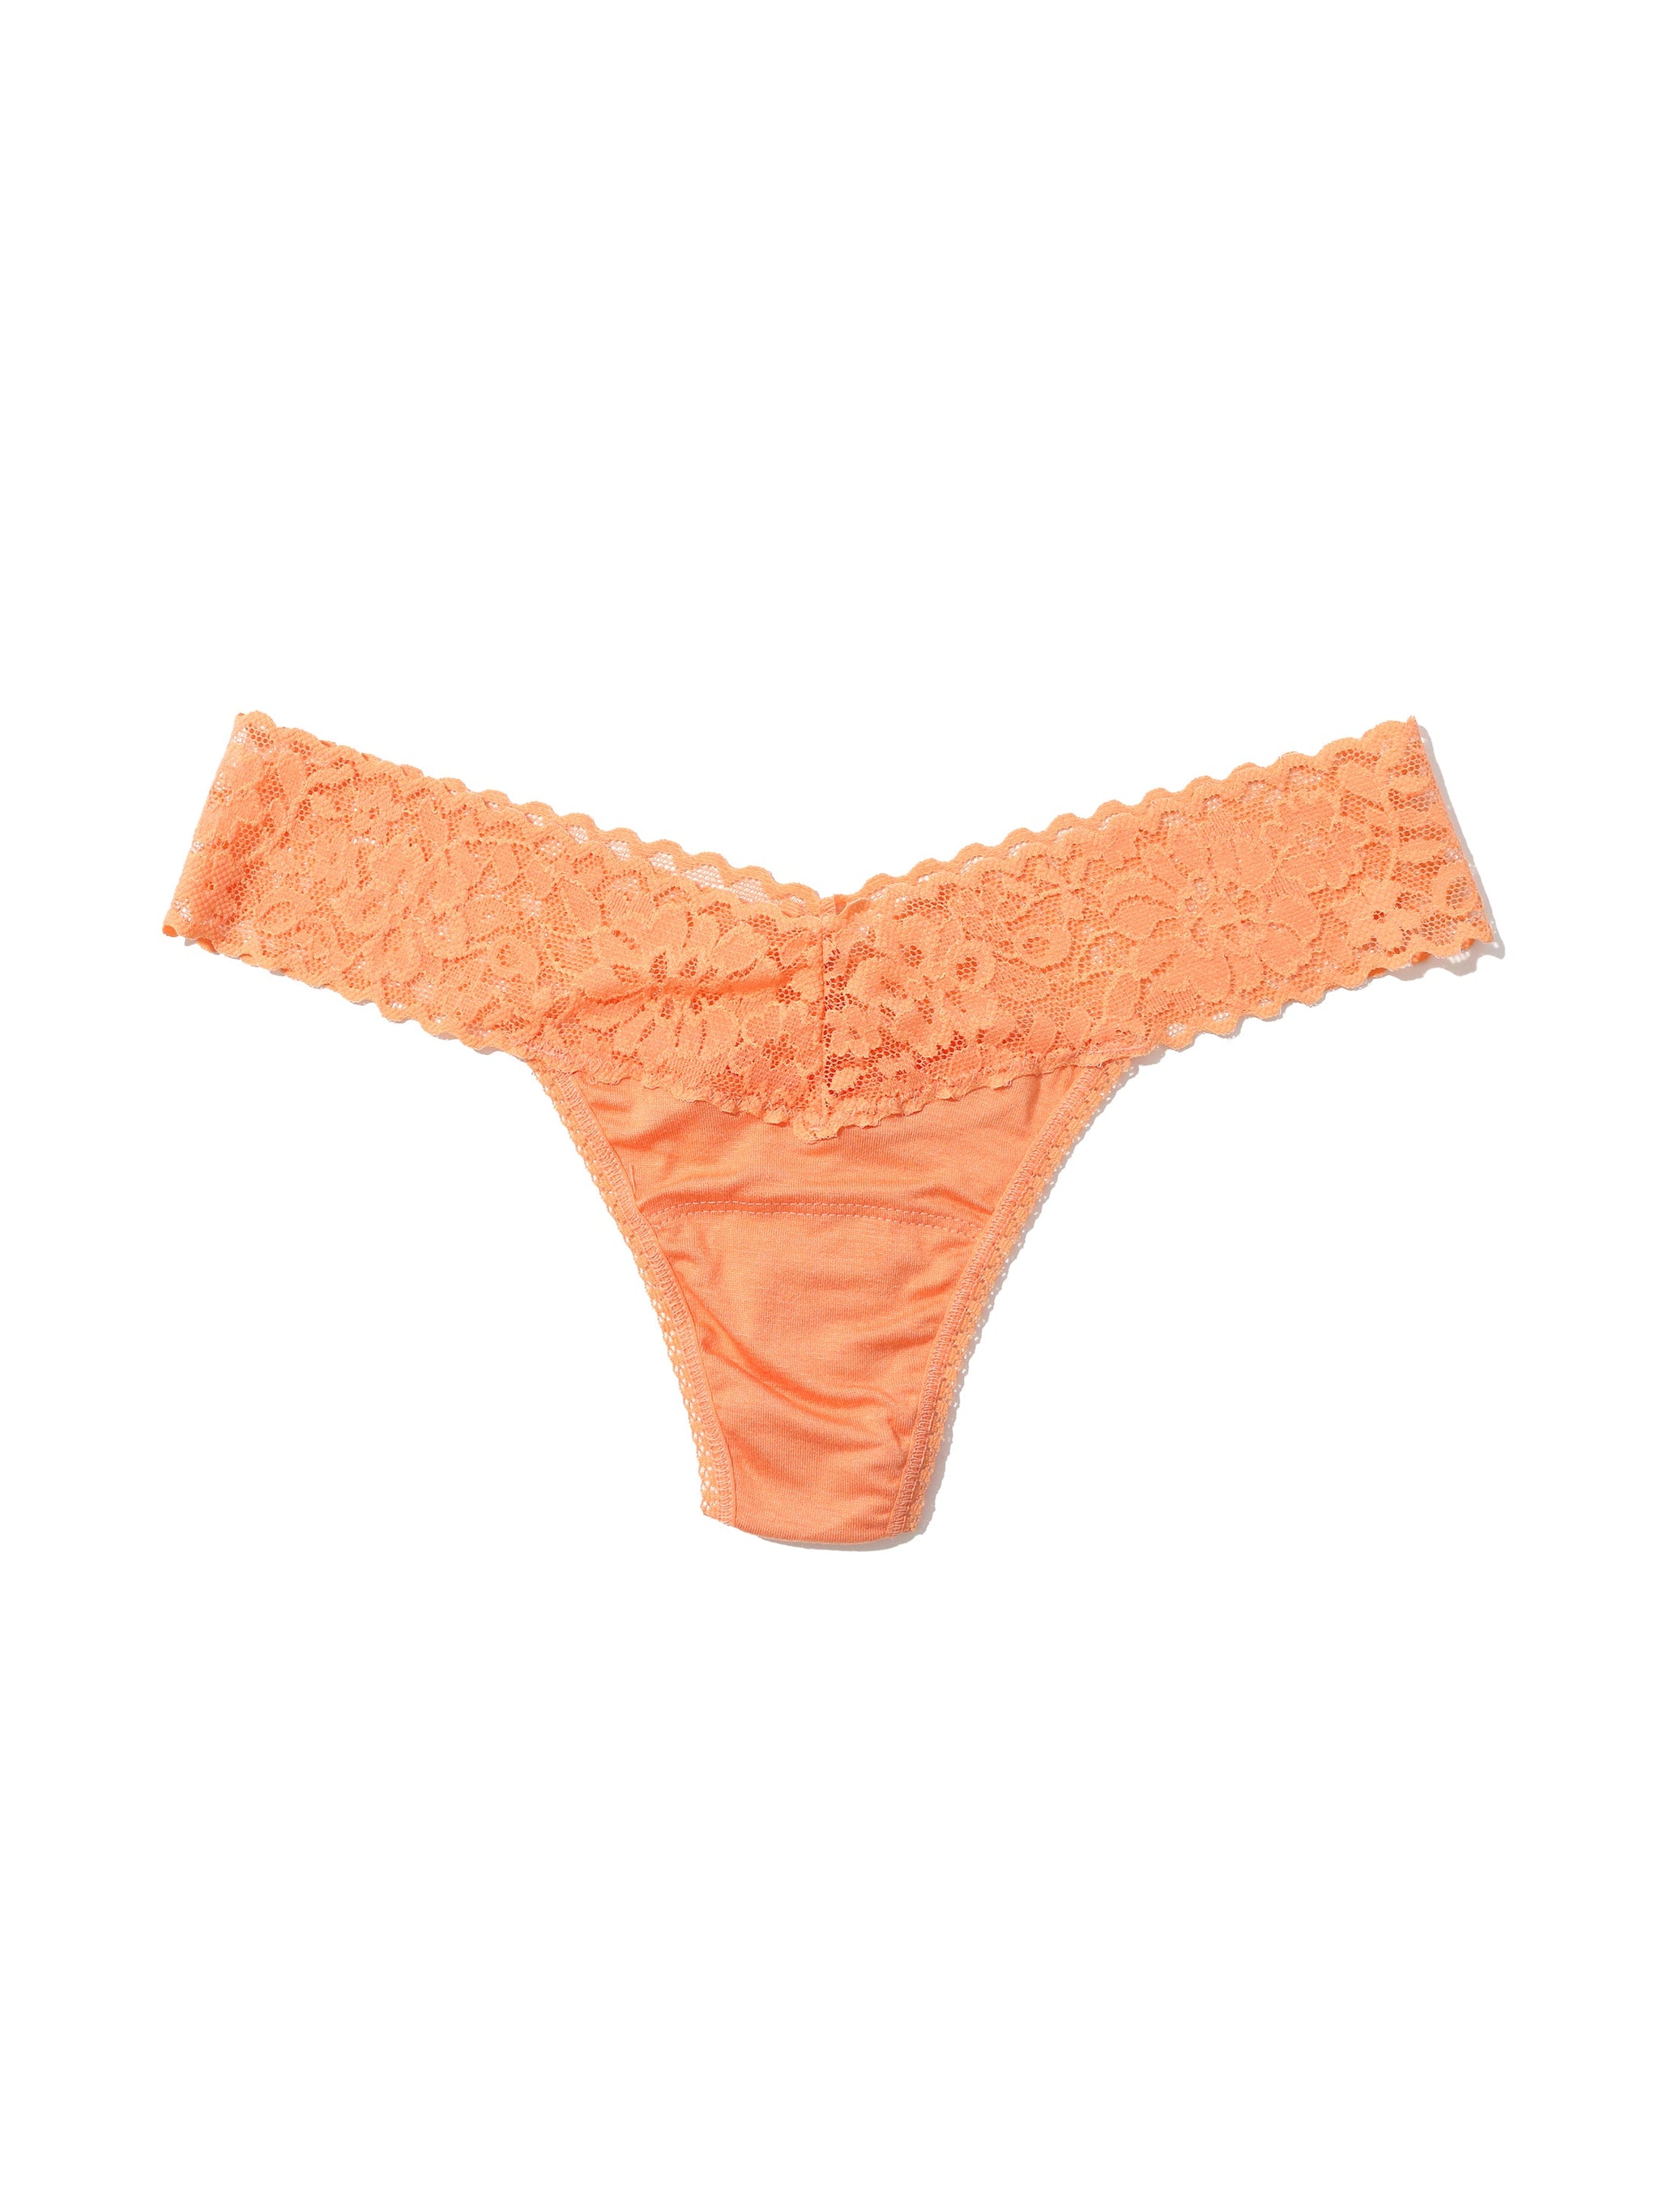 Hanky Panky Celebrates Its 40th Anniversary With a Capsule Collection of  Its Original '70s Lingerie